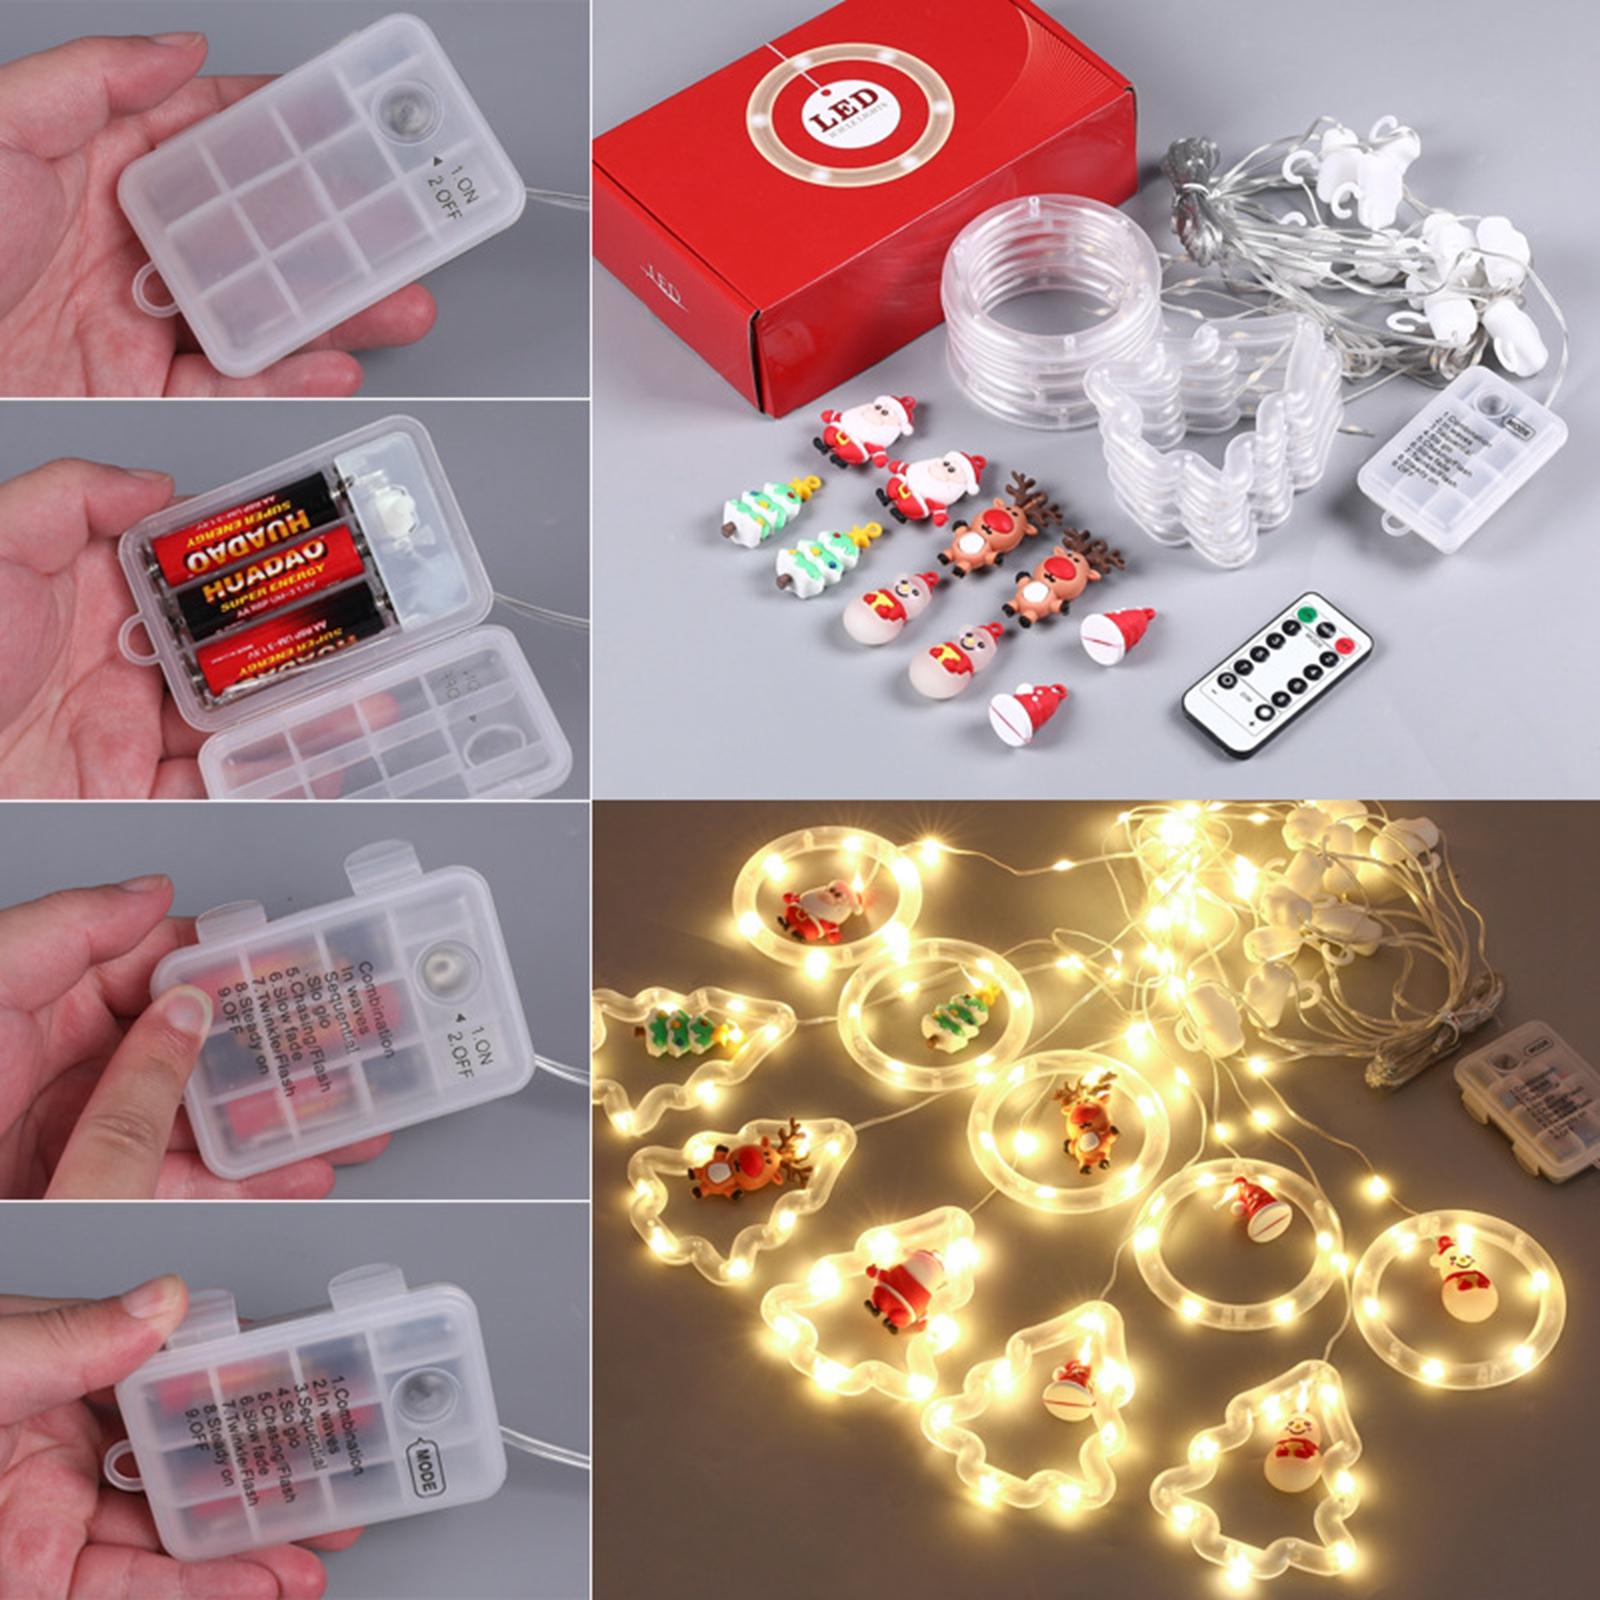 LED Christmas String Light Hanging Ornament for Outdoor Home Decoration USB